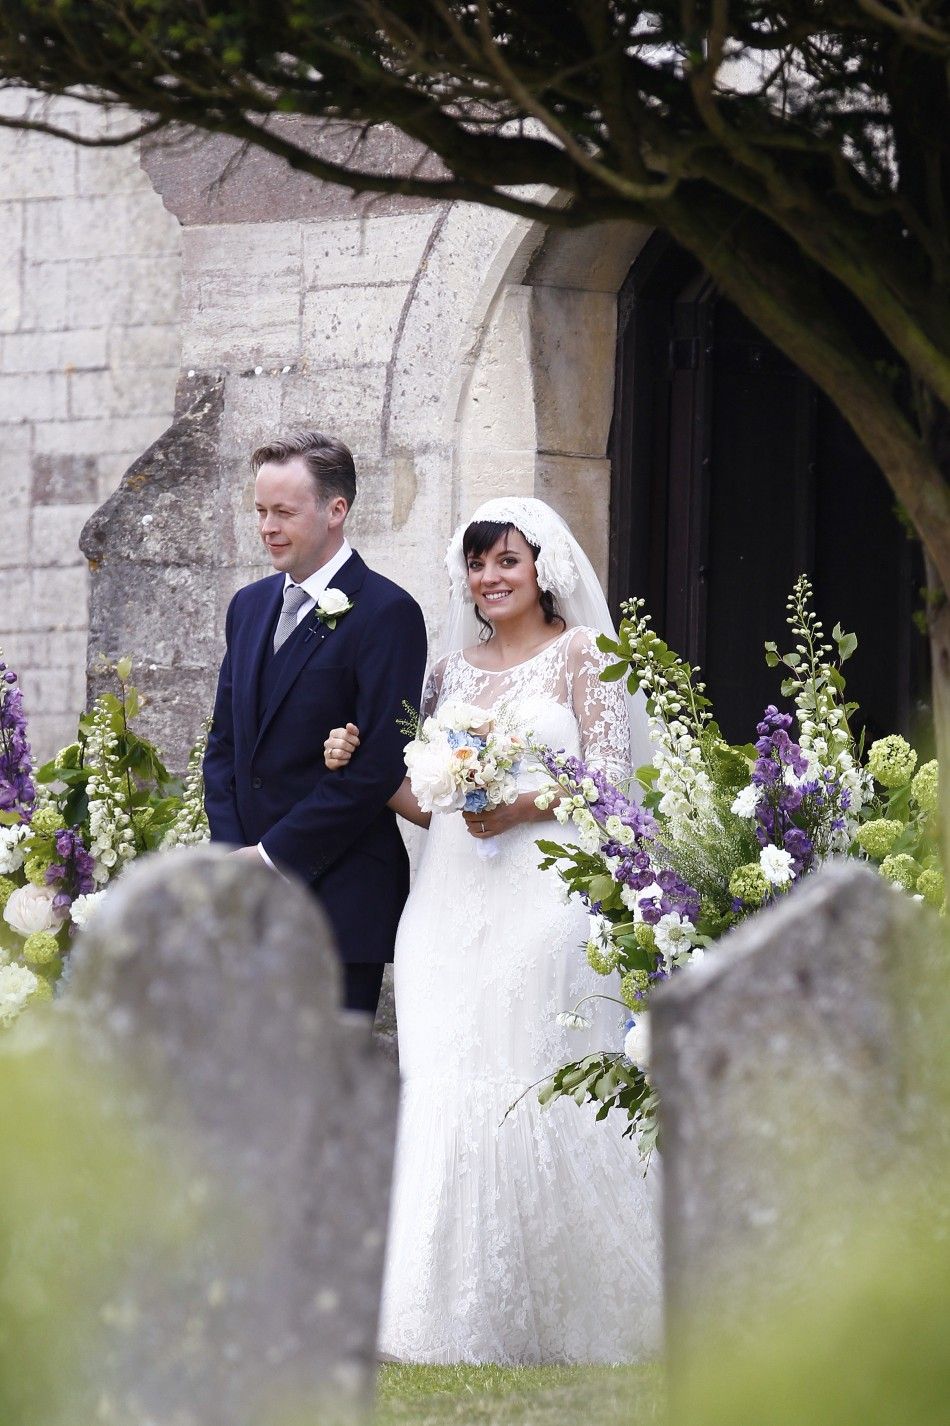 British Singer Lily Allen smiles after marrying Sam Cooper as the couple leaves St James the Great Church in Cranham, Goucestershire, western England, June 11, 2011.